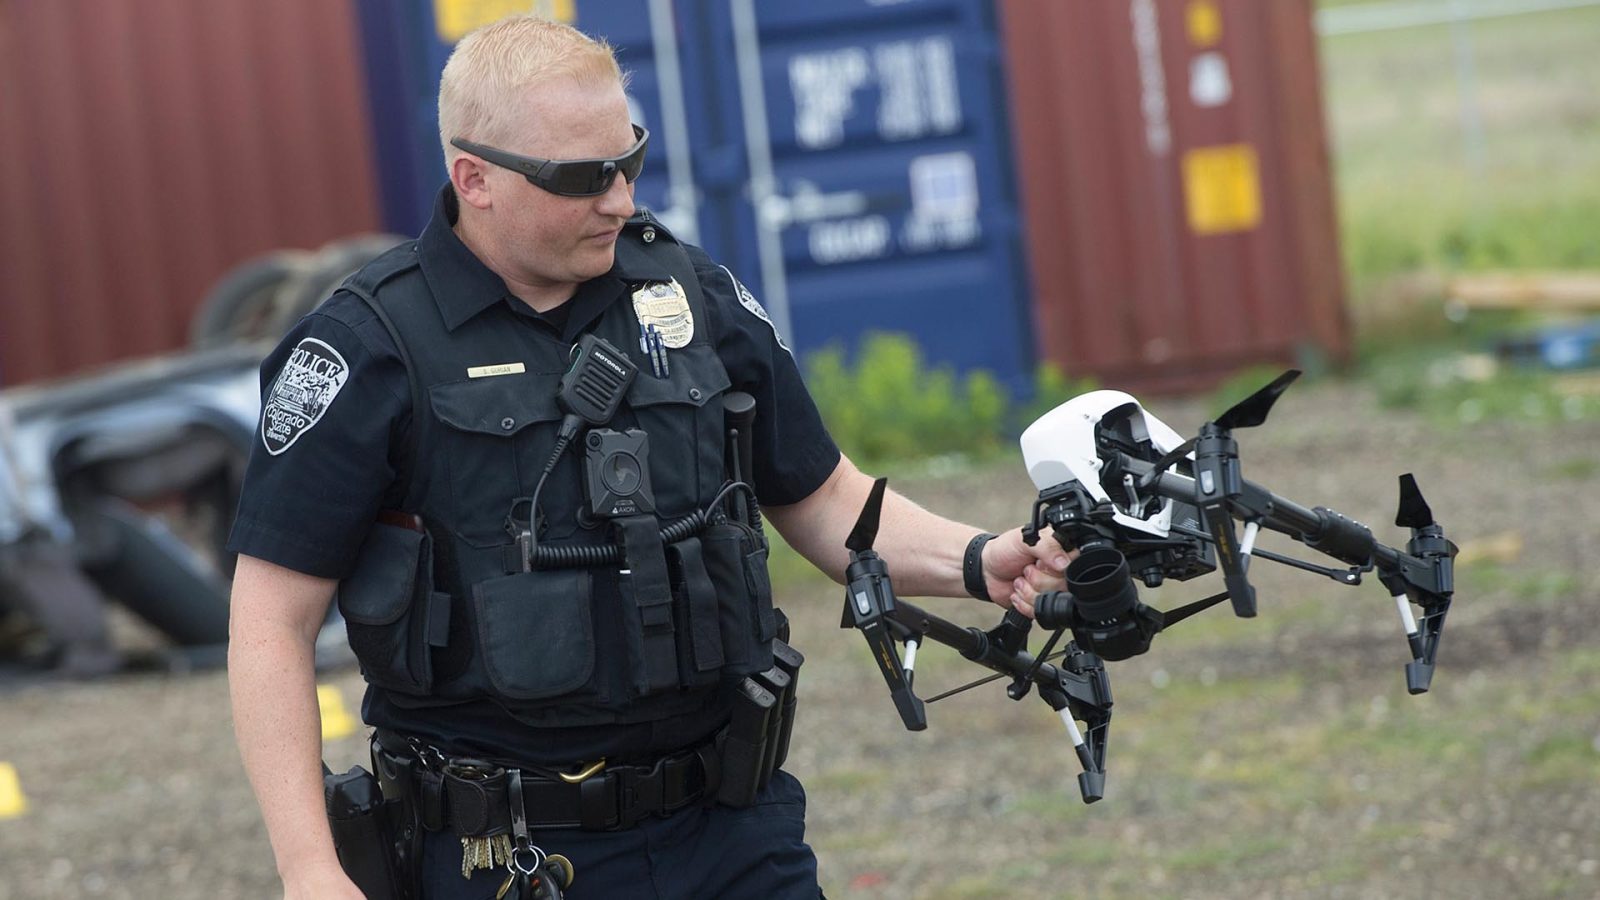 Drones are helping law enforcement investigate traffic accidents in a brand new way